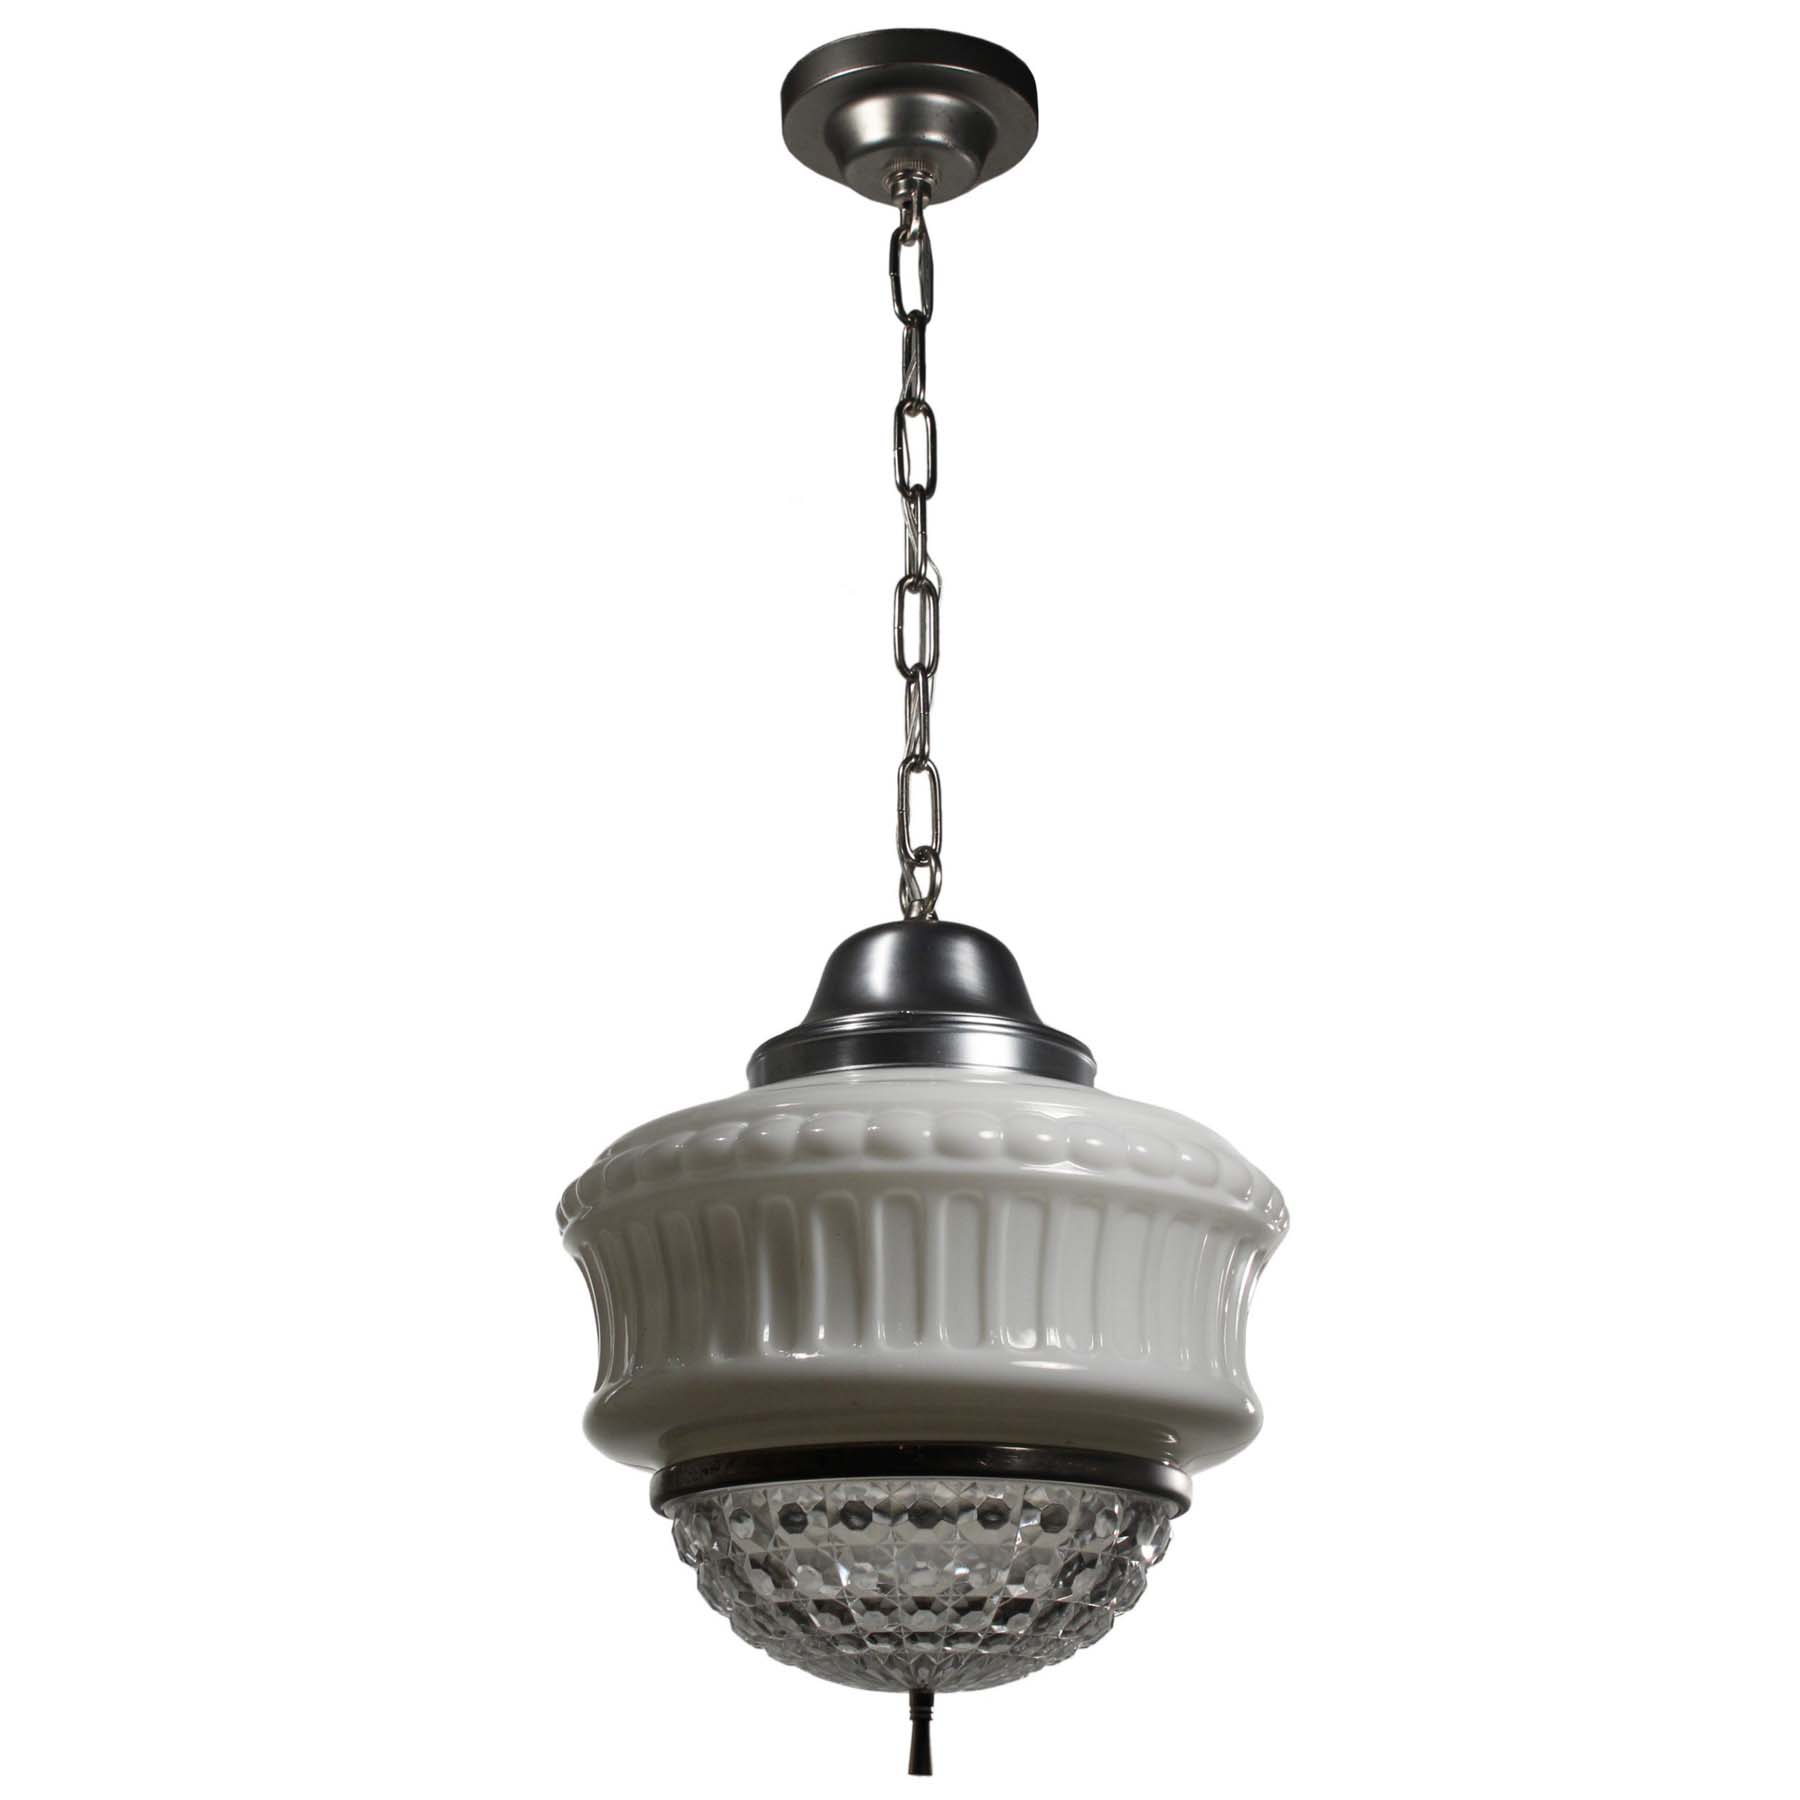 SOLD Unusual Antique Pendant Light with Two-Part Prismatic Shade-66862